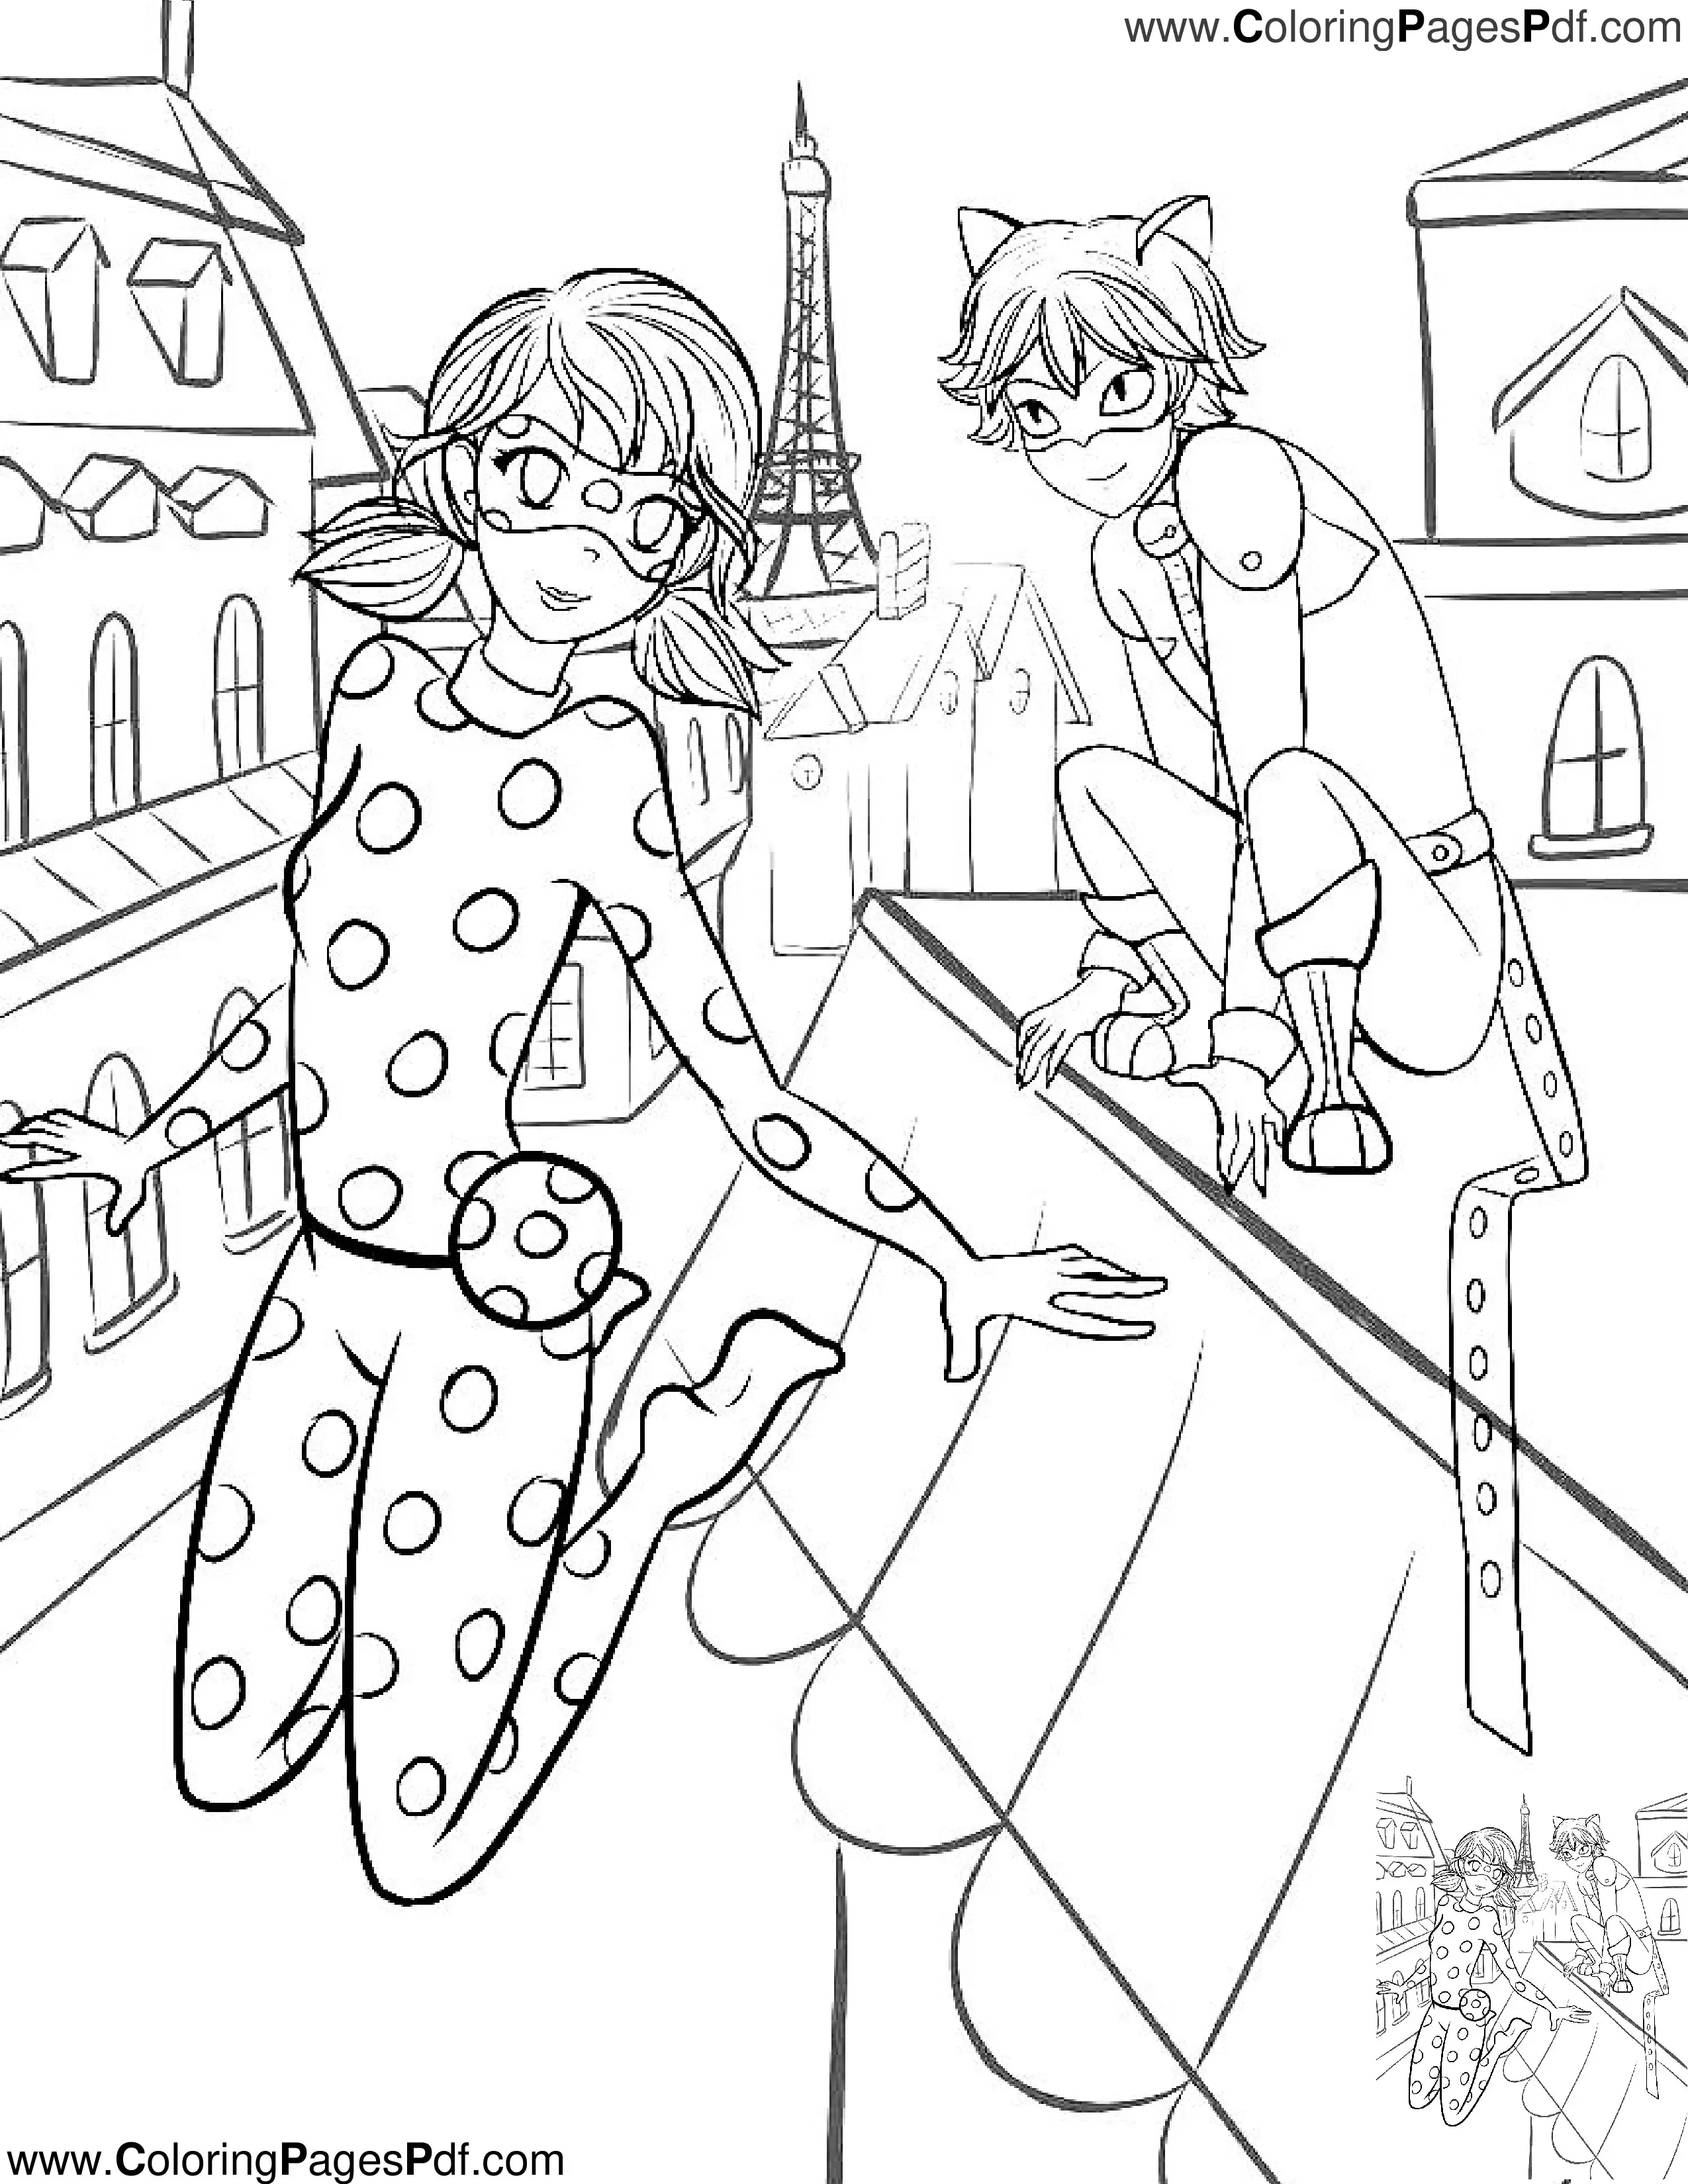 Miraculous ladybug season 4 coloring pages